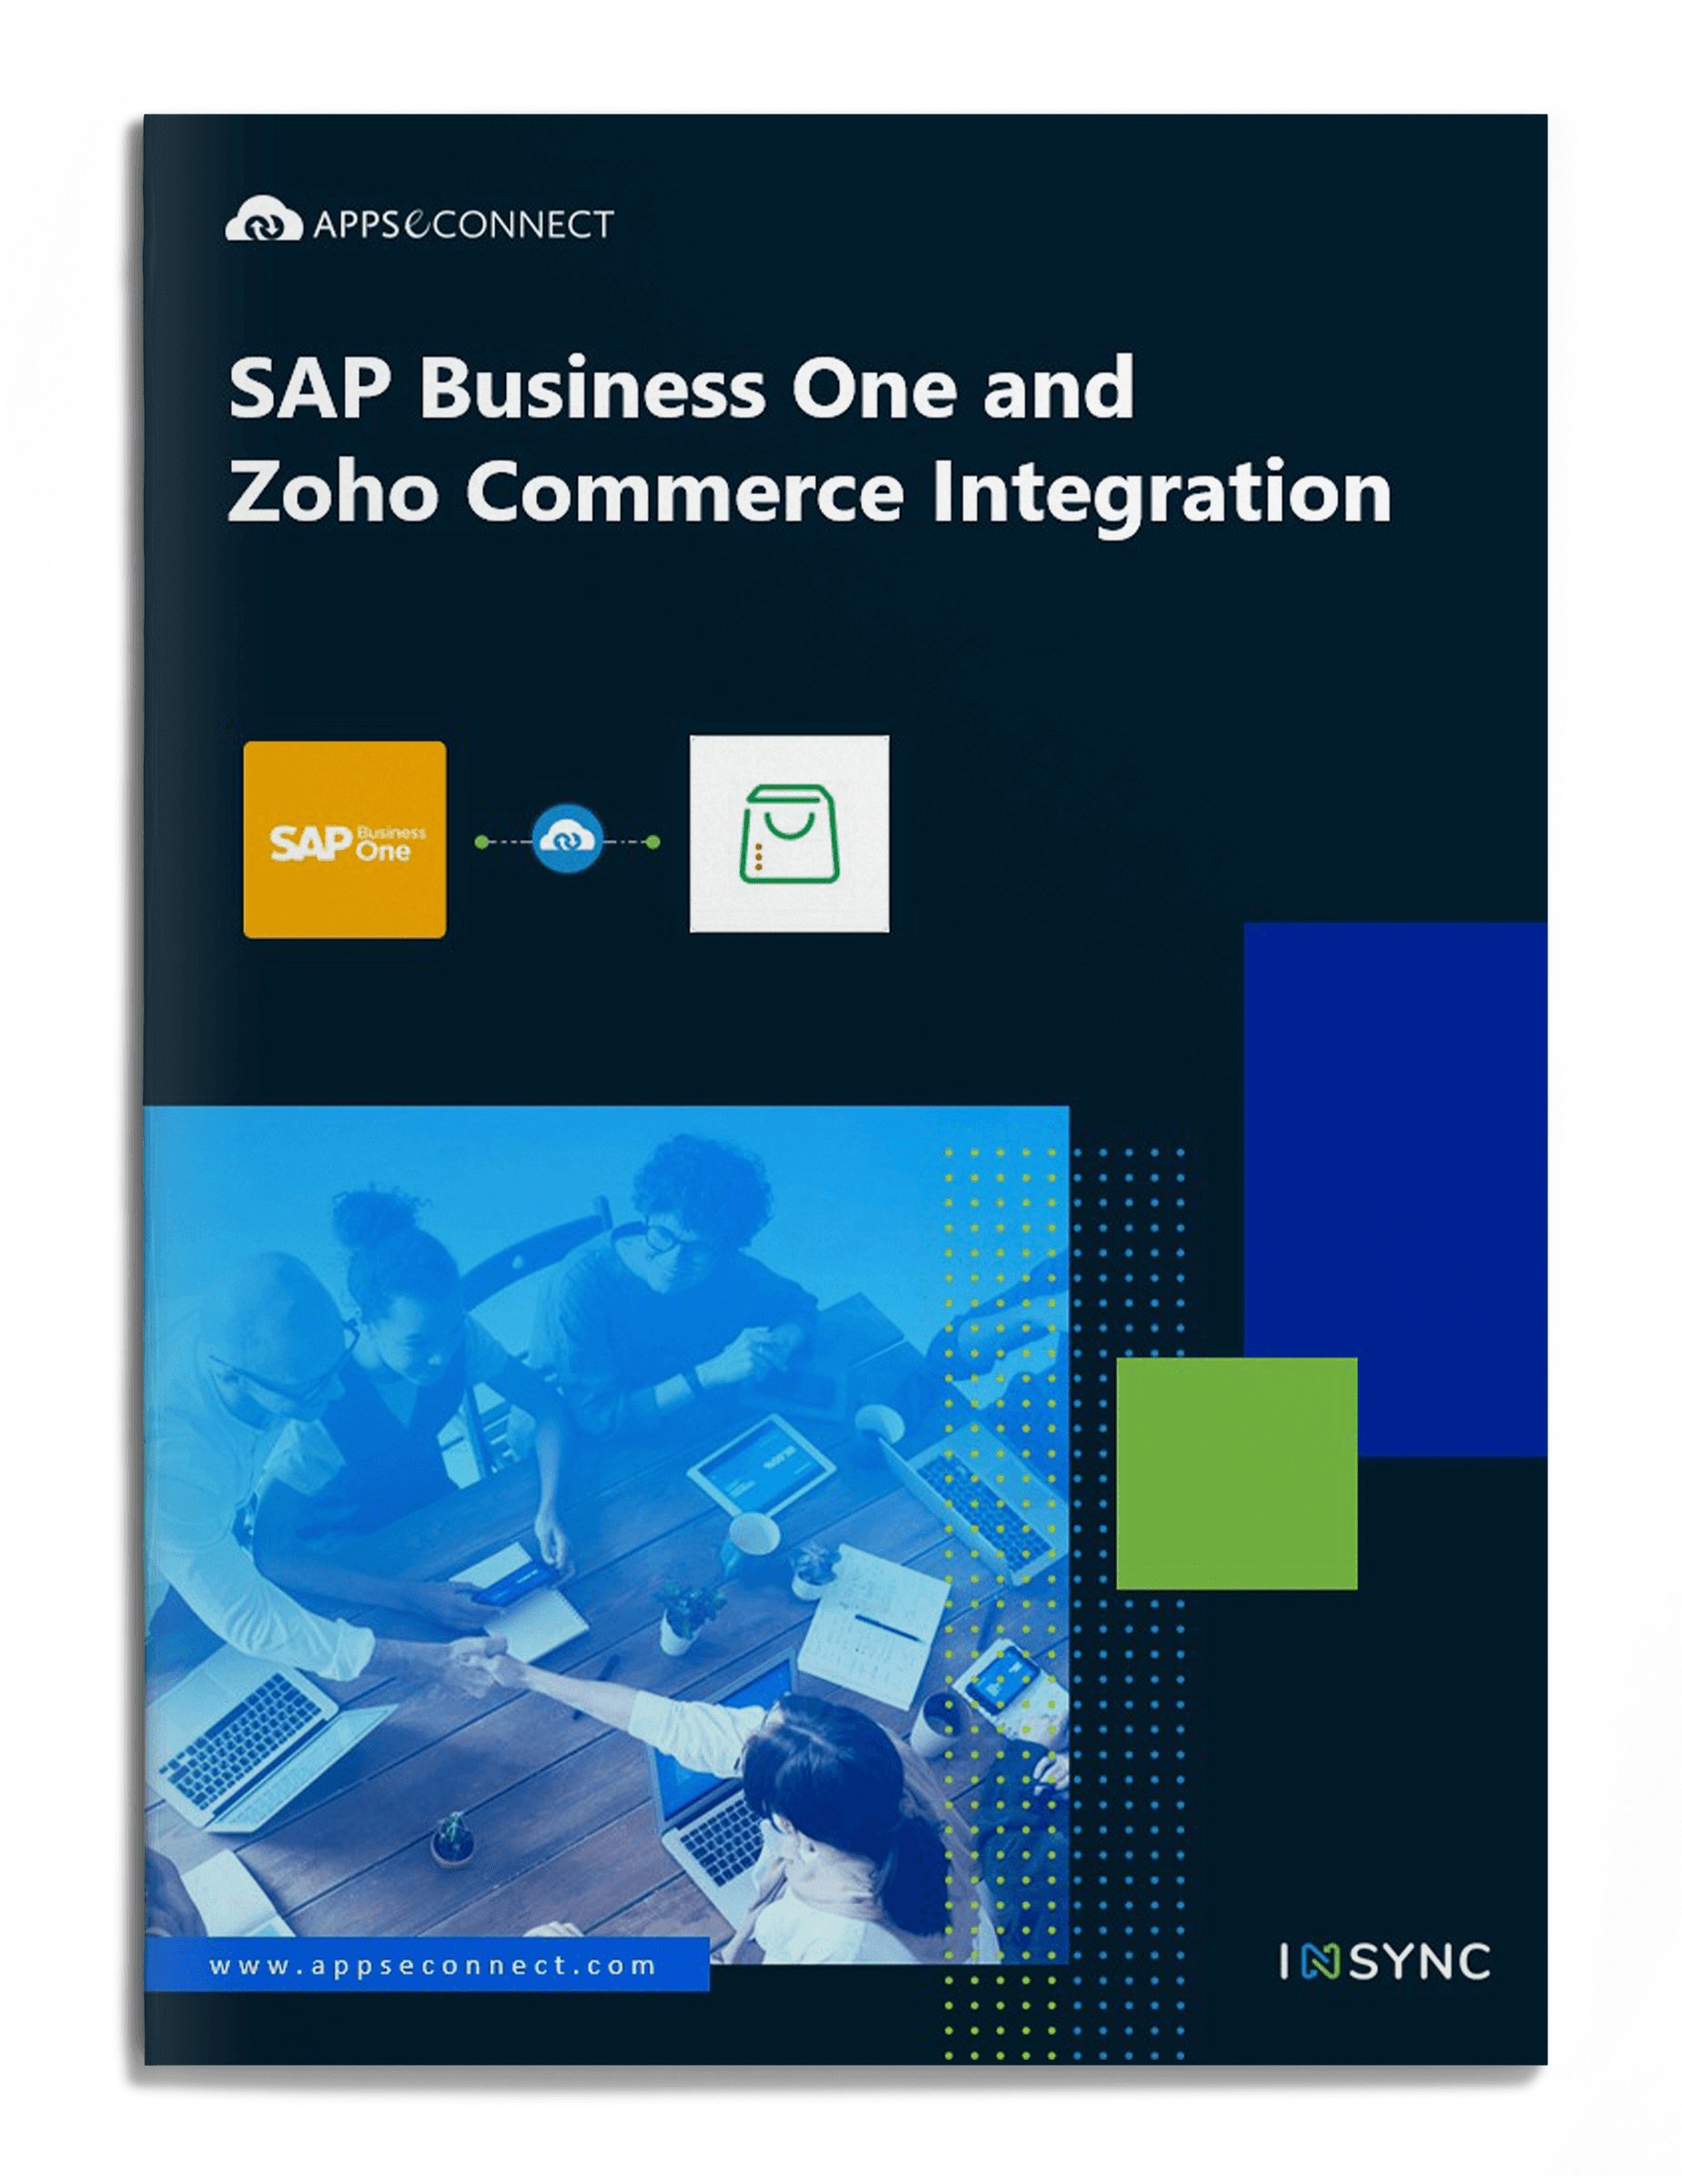 sap-business-one-zohocommerce-integration-brochure-cover